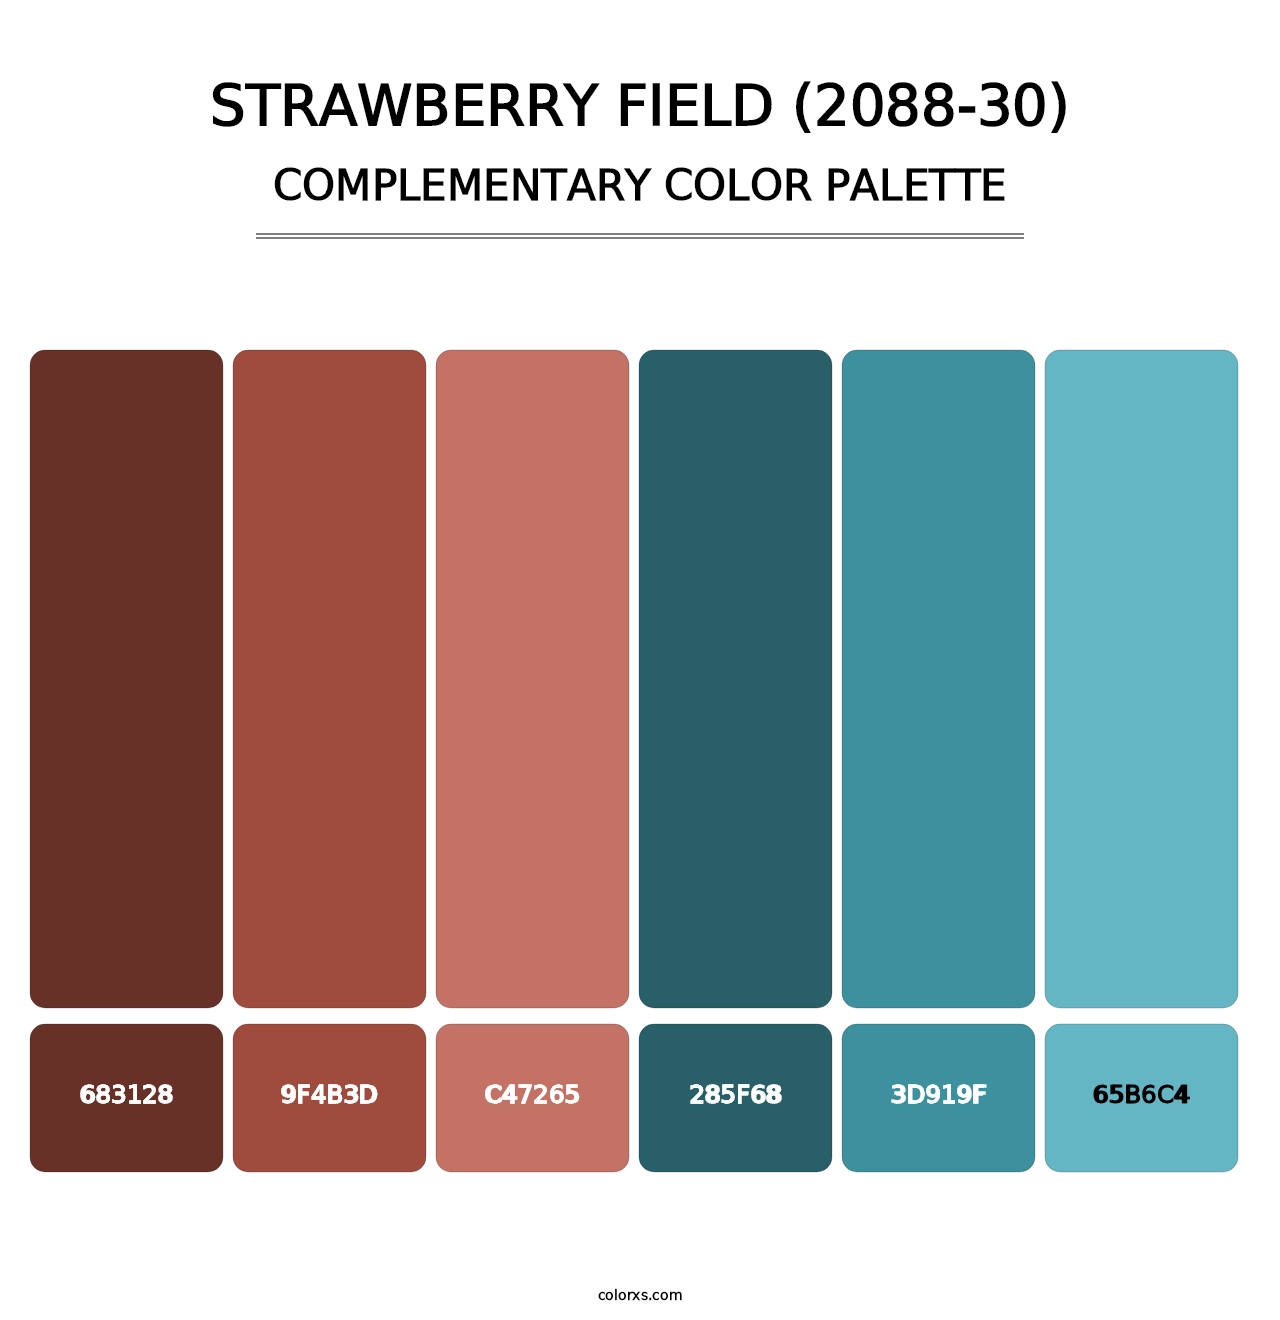 Strawberry Field (2088-30) - Complementary Color Palette